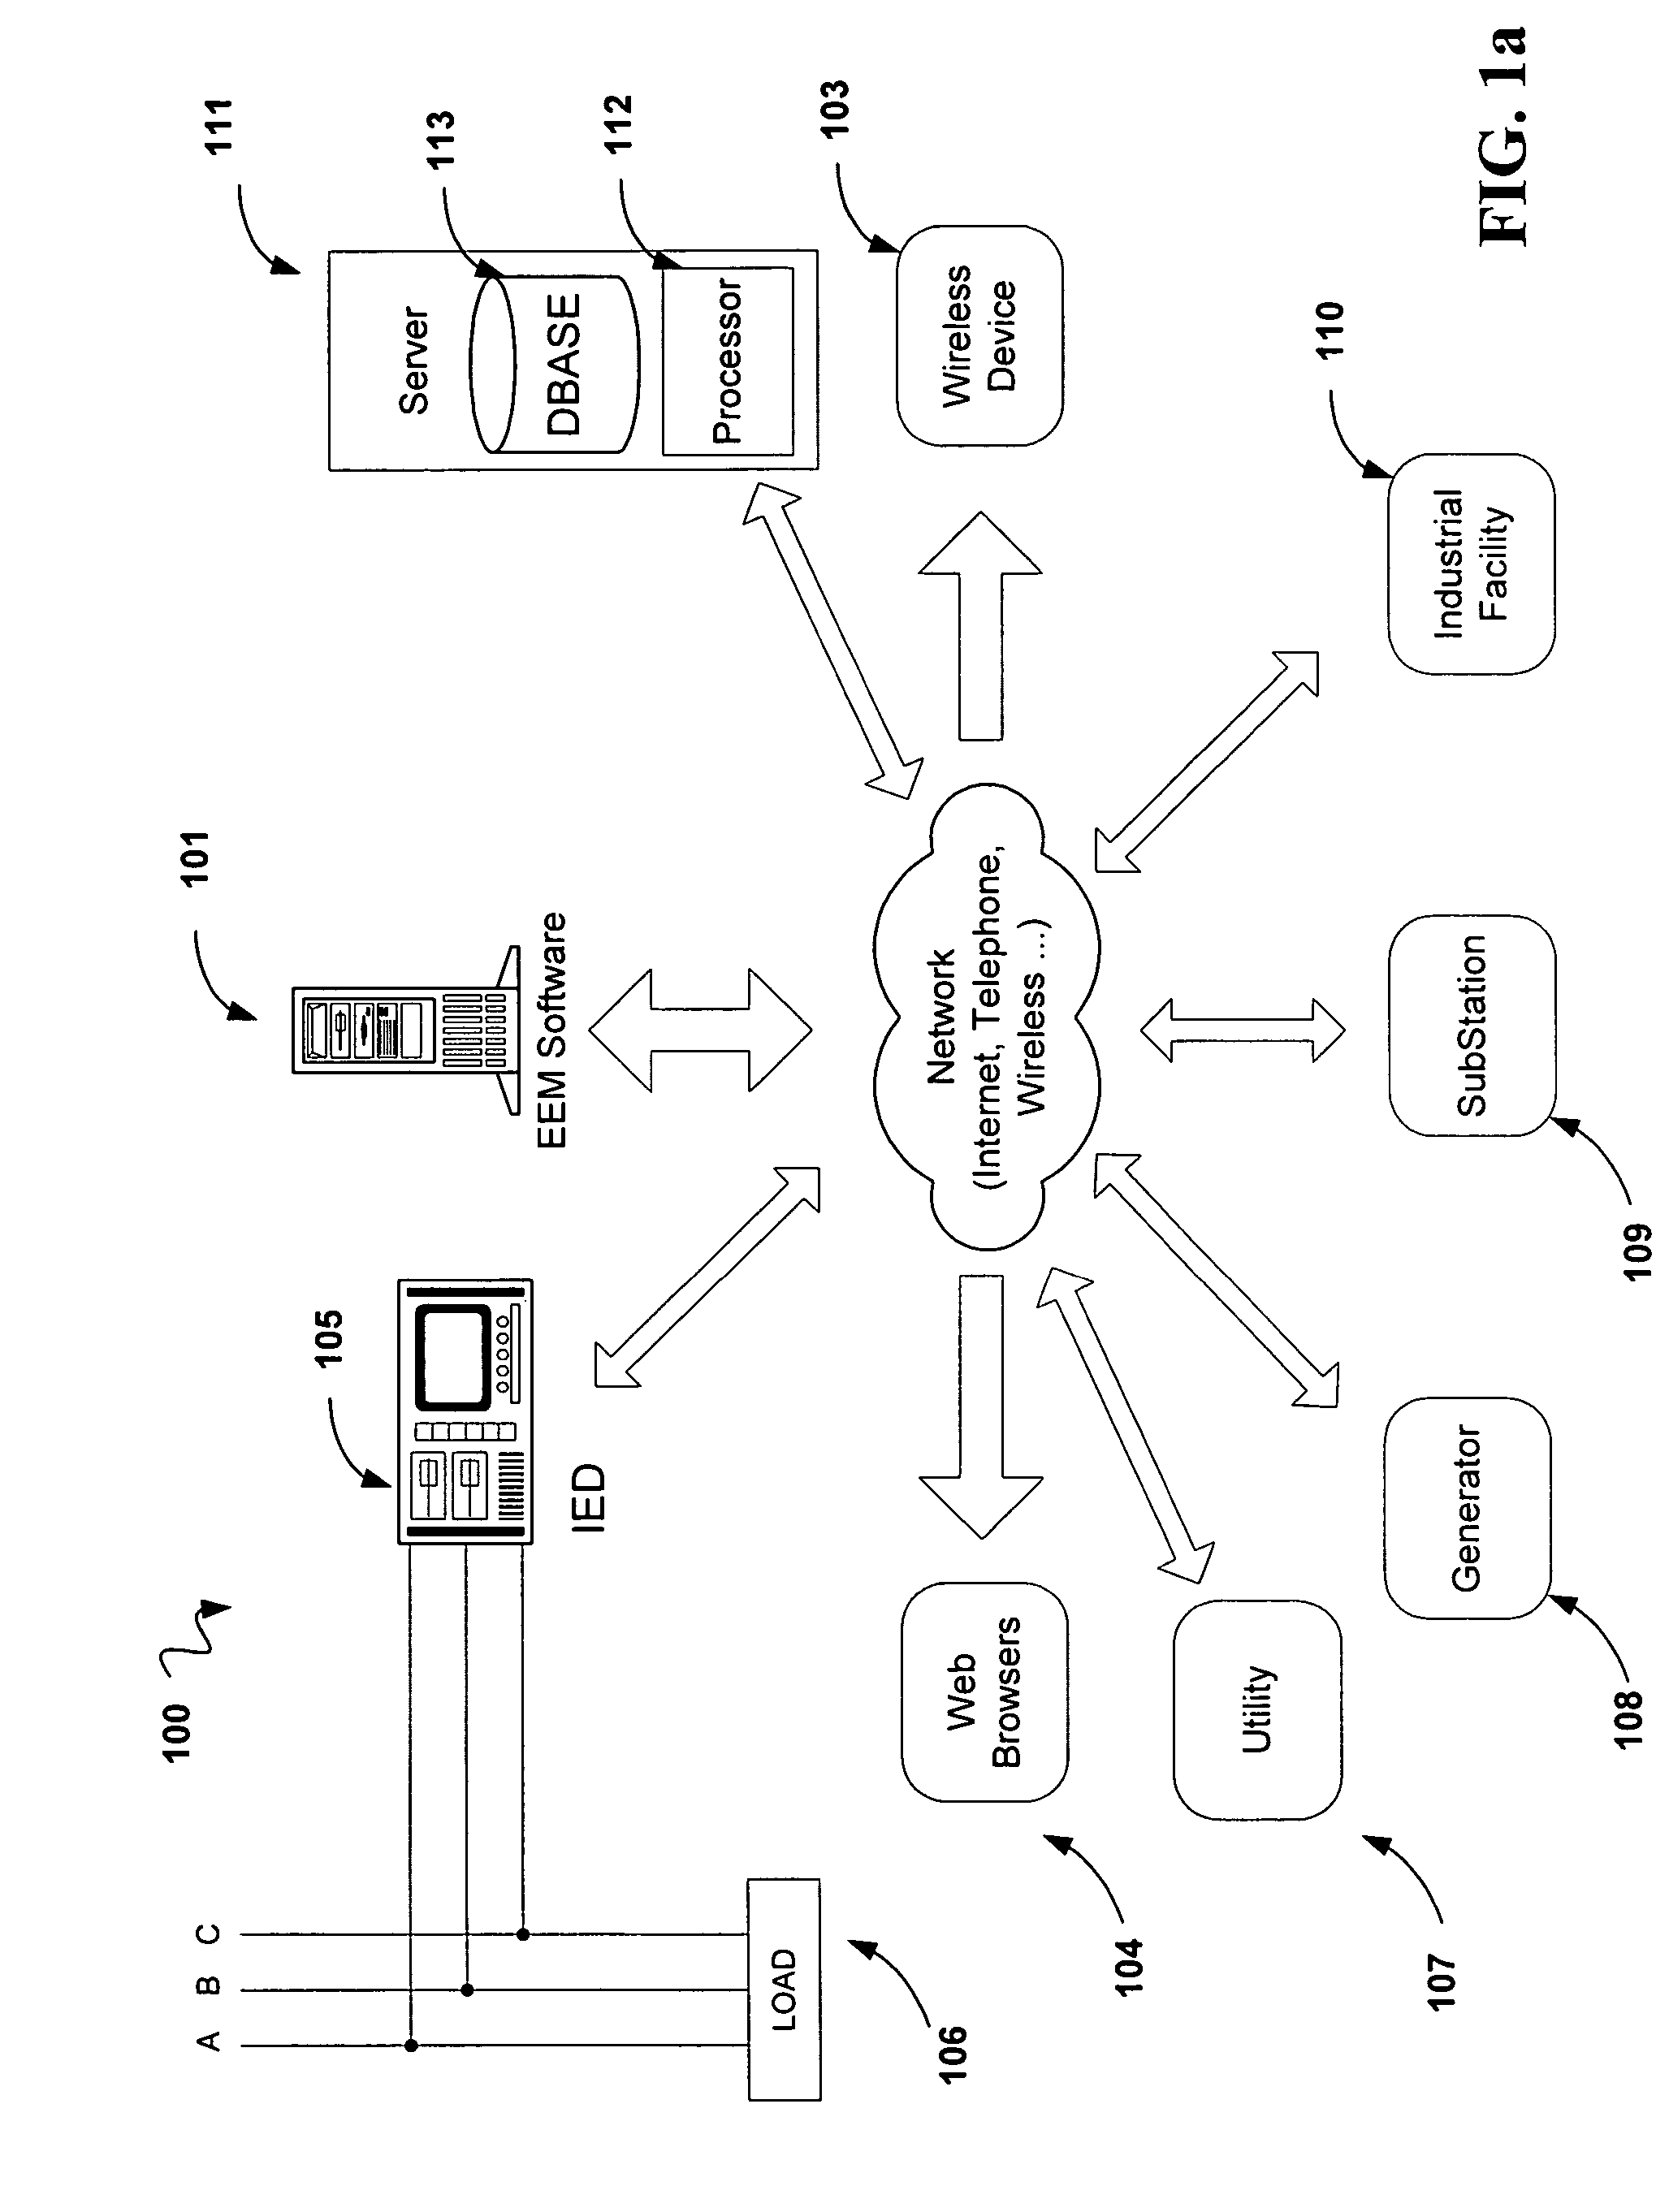 Human machine interface for an energy analytics system